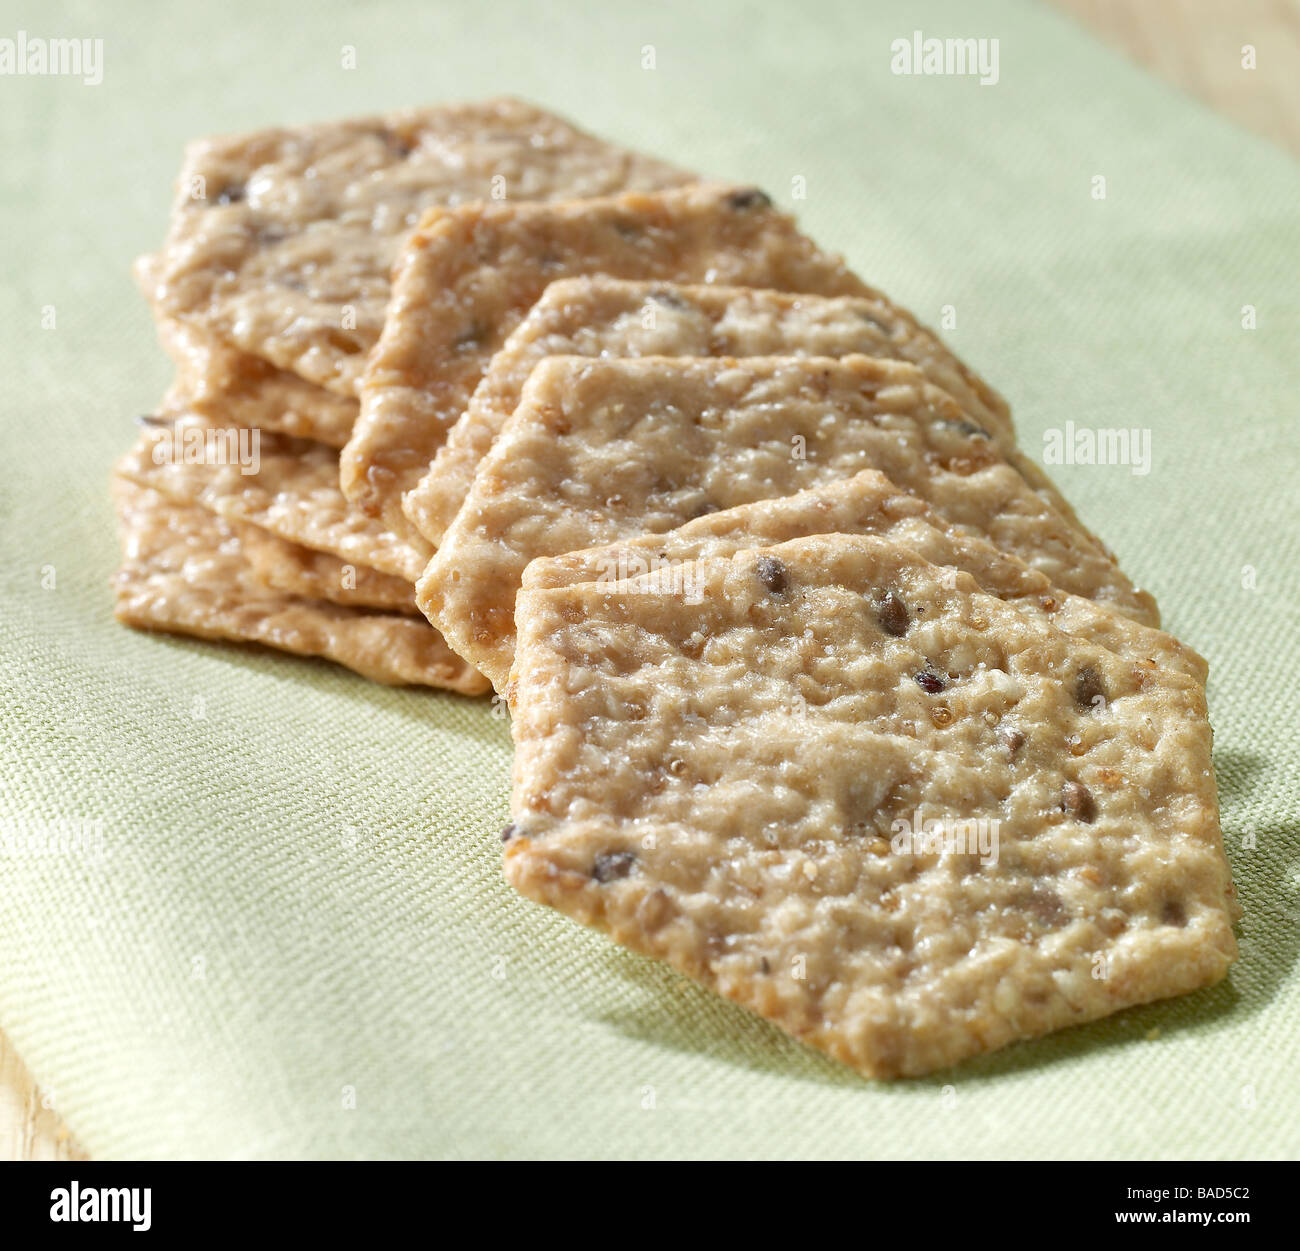 Multi grain crackers on a green background Stock Photo